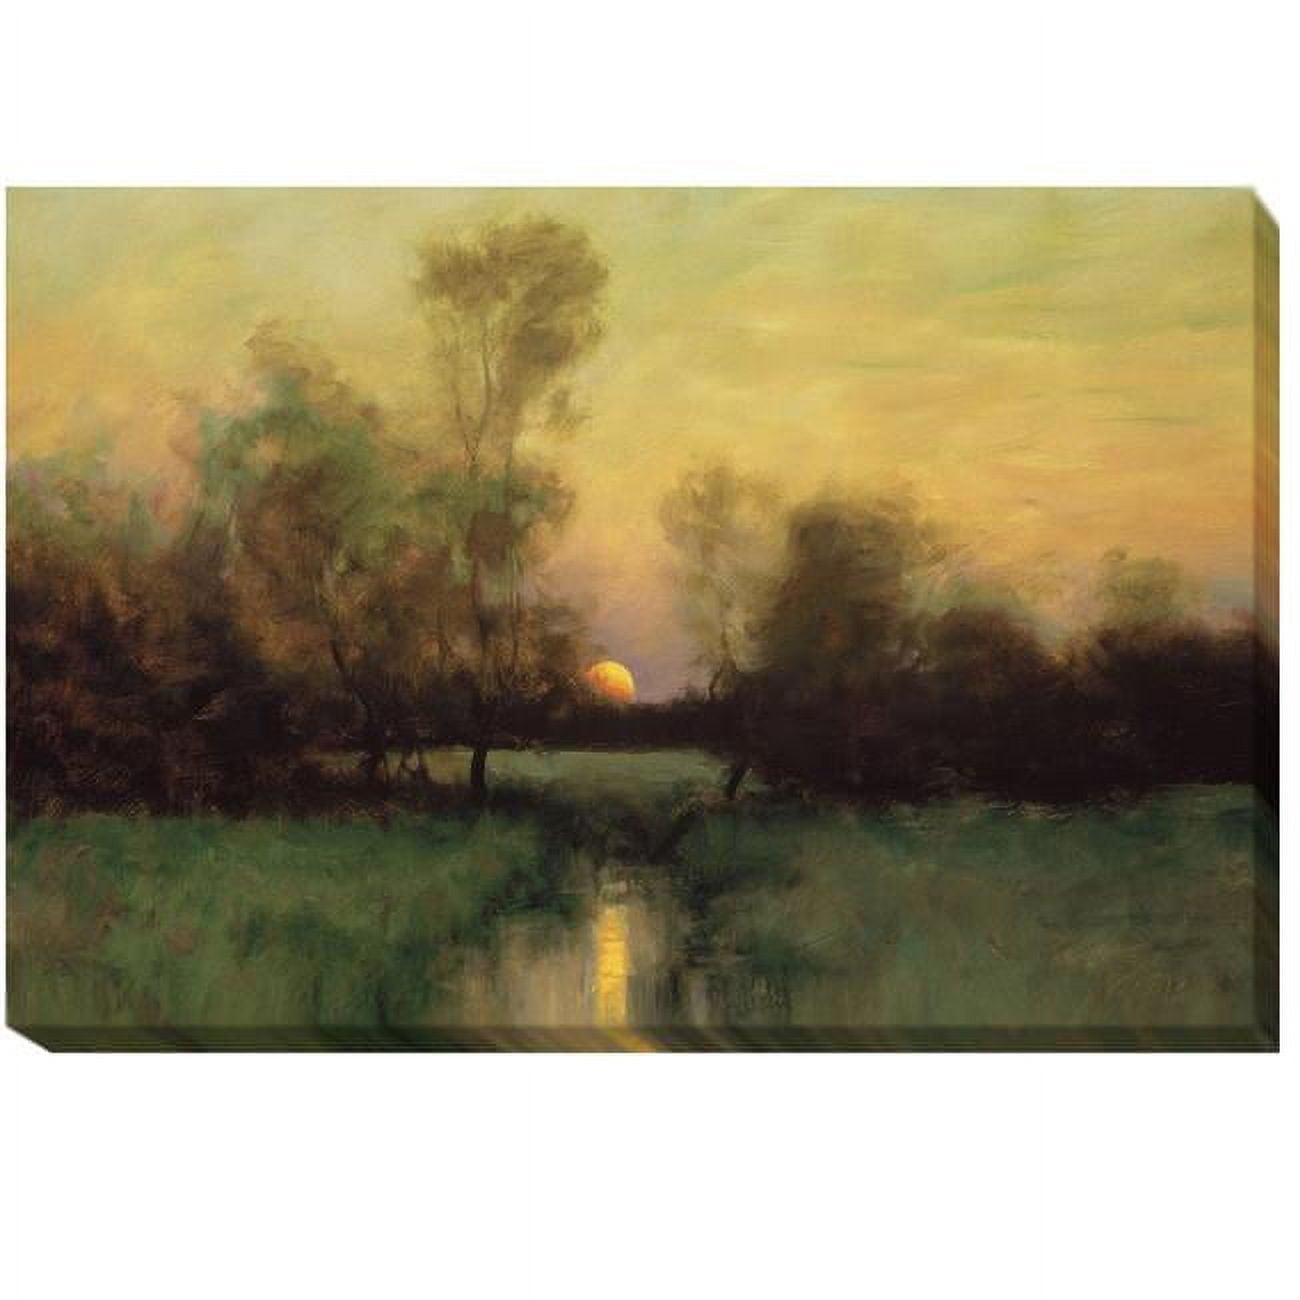 1215am111cg Summer Moonrise By Dennis Sheehan Premium Gallery-wrapped Canvas Giclee Art - 12 X 15 X 1.5 In.